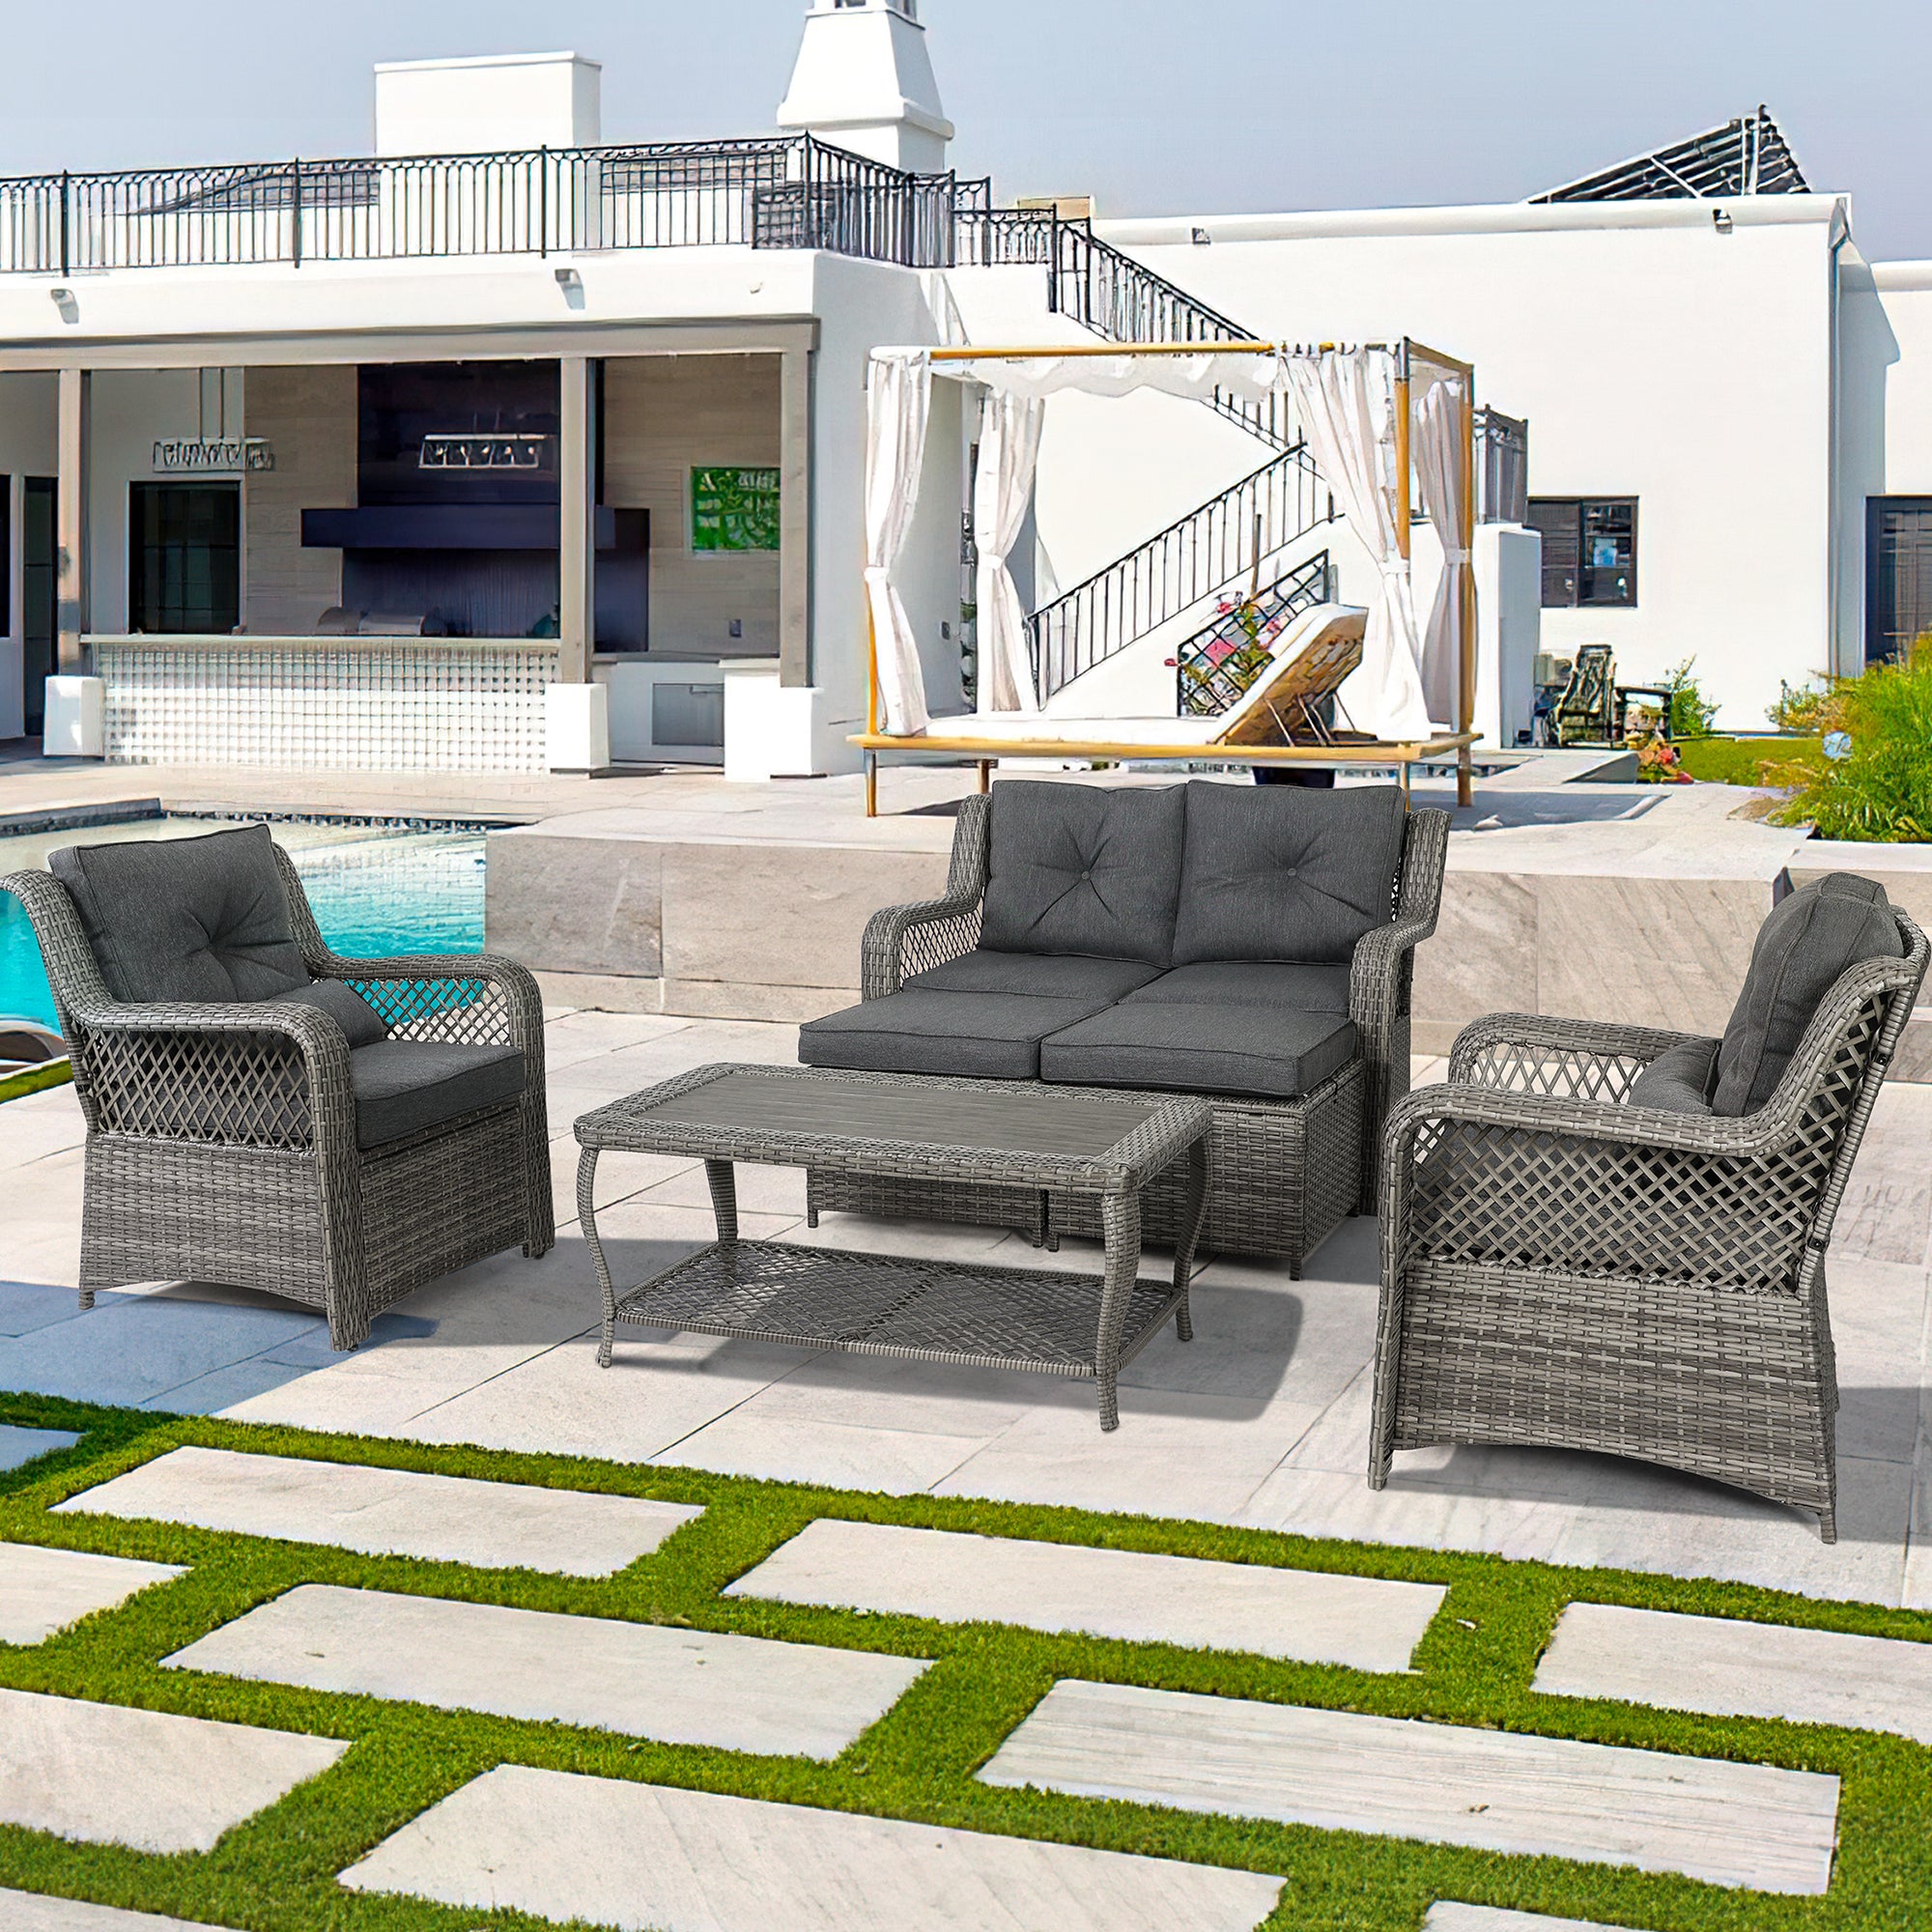 homrest-patio-furniture-set-6-pieces-rattan-outdoor-patio-conversation-sets-sectional-with-ottoman-cushions-love-seat-grey